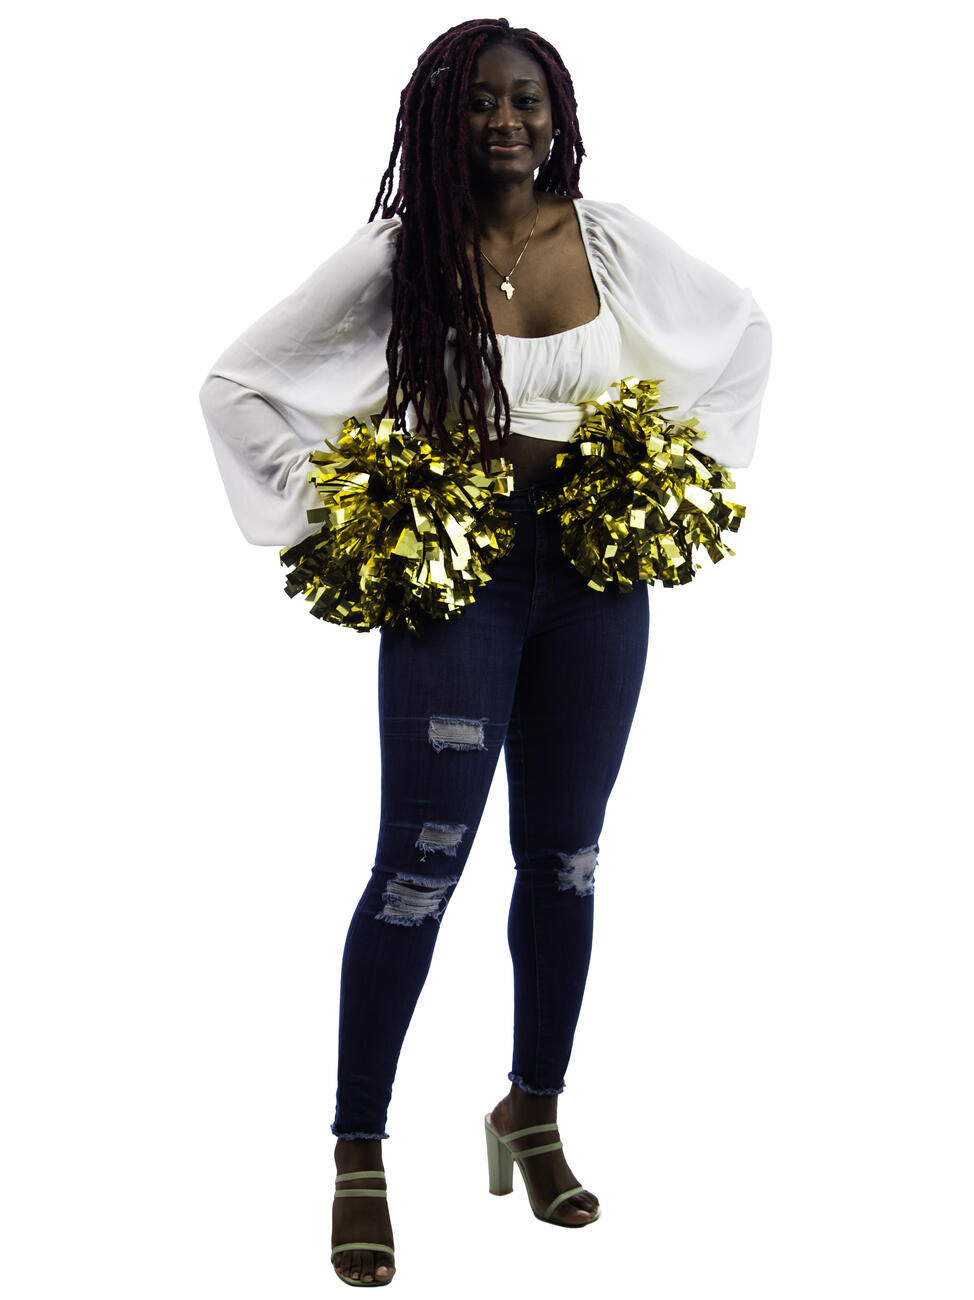 Tracey Ackah holding two gold pompoms with her hands on her hips.